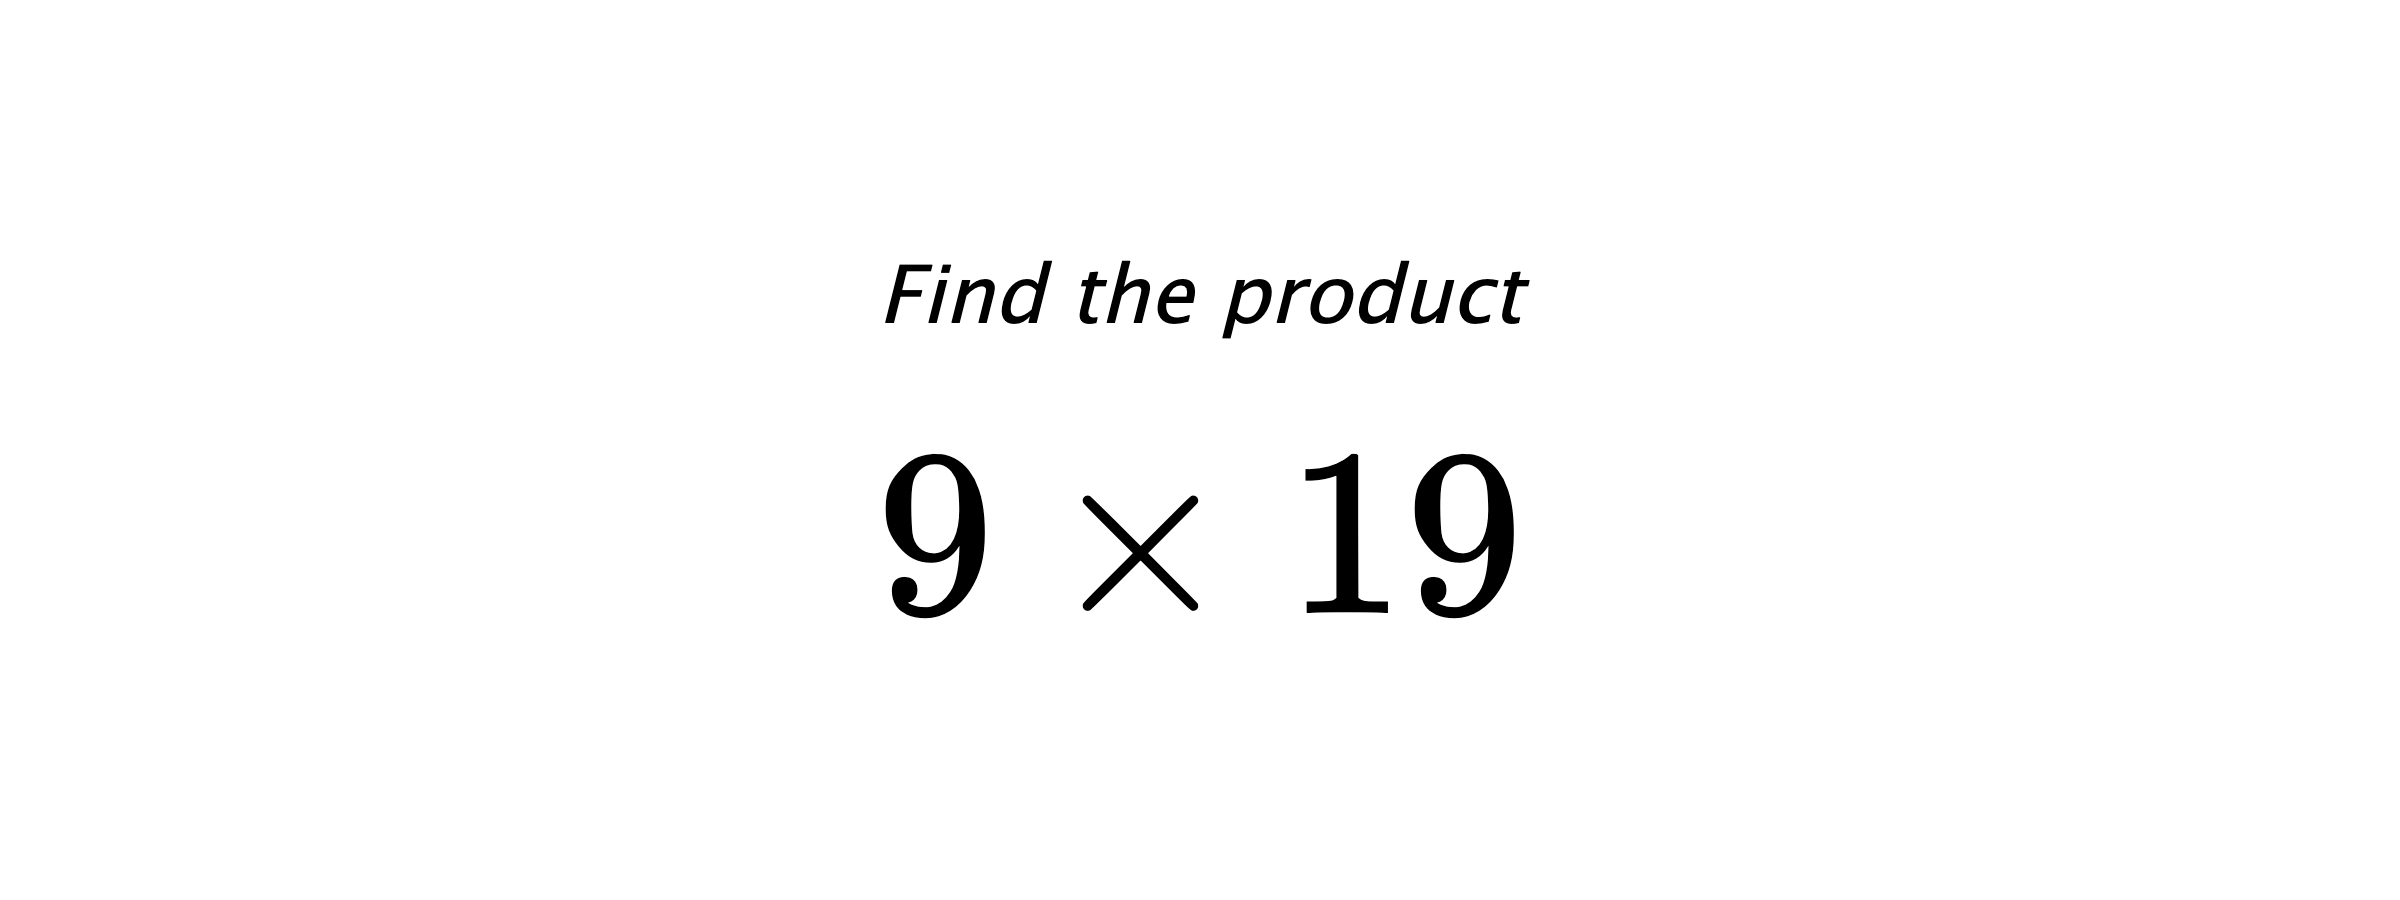 Find the product $ 9 \times 19 $